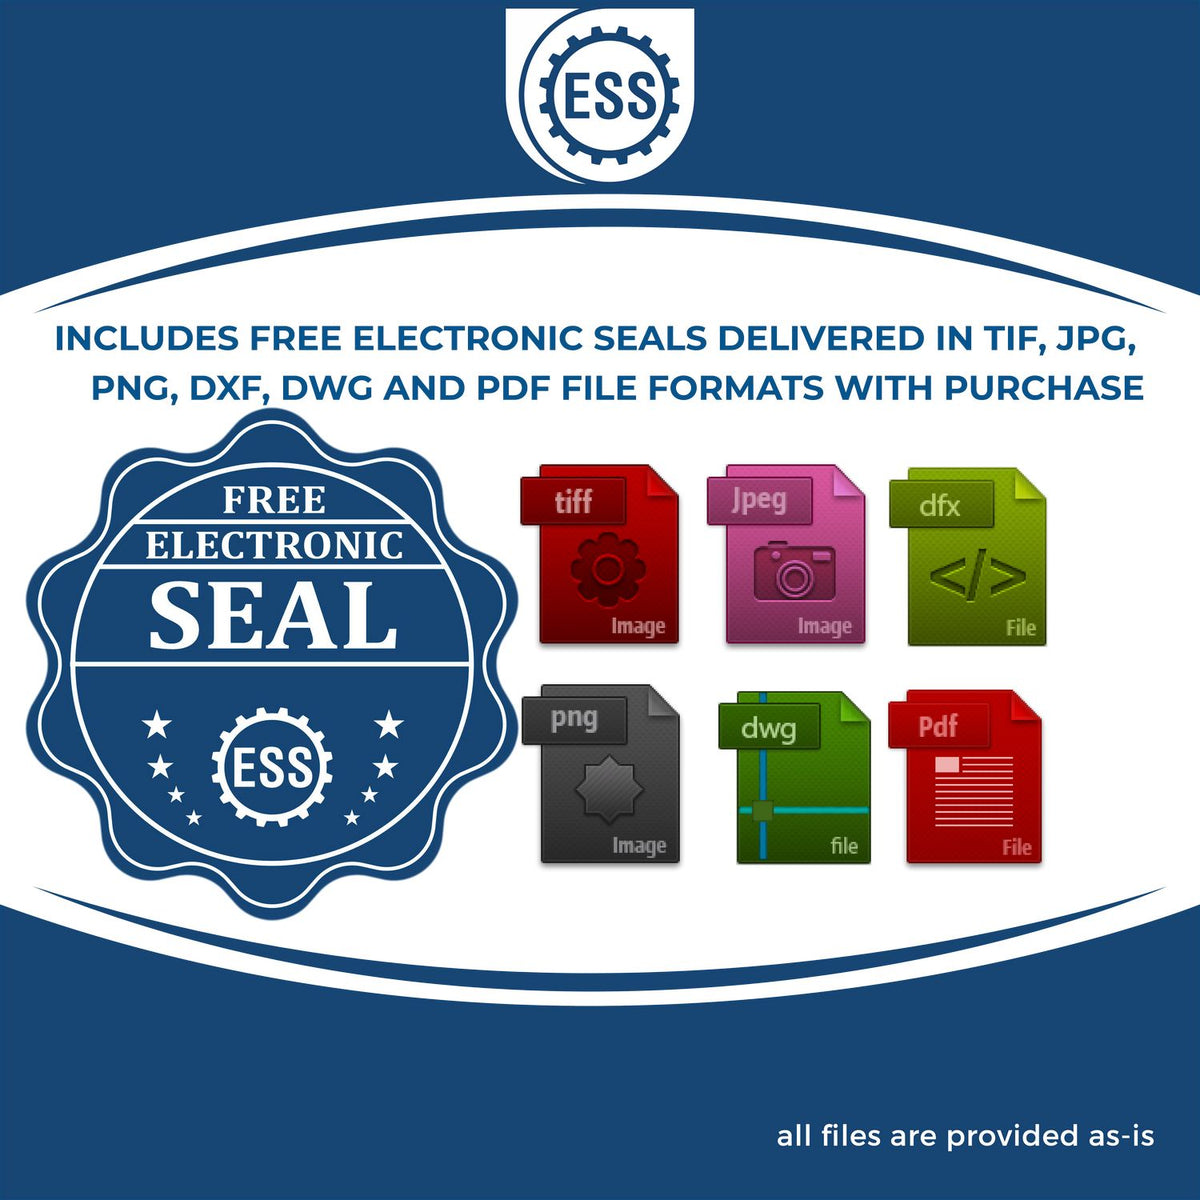 An infographic for the free electronic seal for the Utah Desk Architect Embossing Seal illustrating the different file type icons such as DXF, DWG, TIF, JPG and PNG.